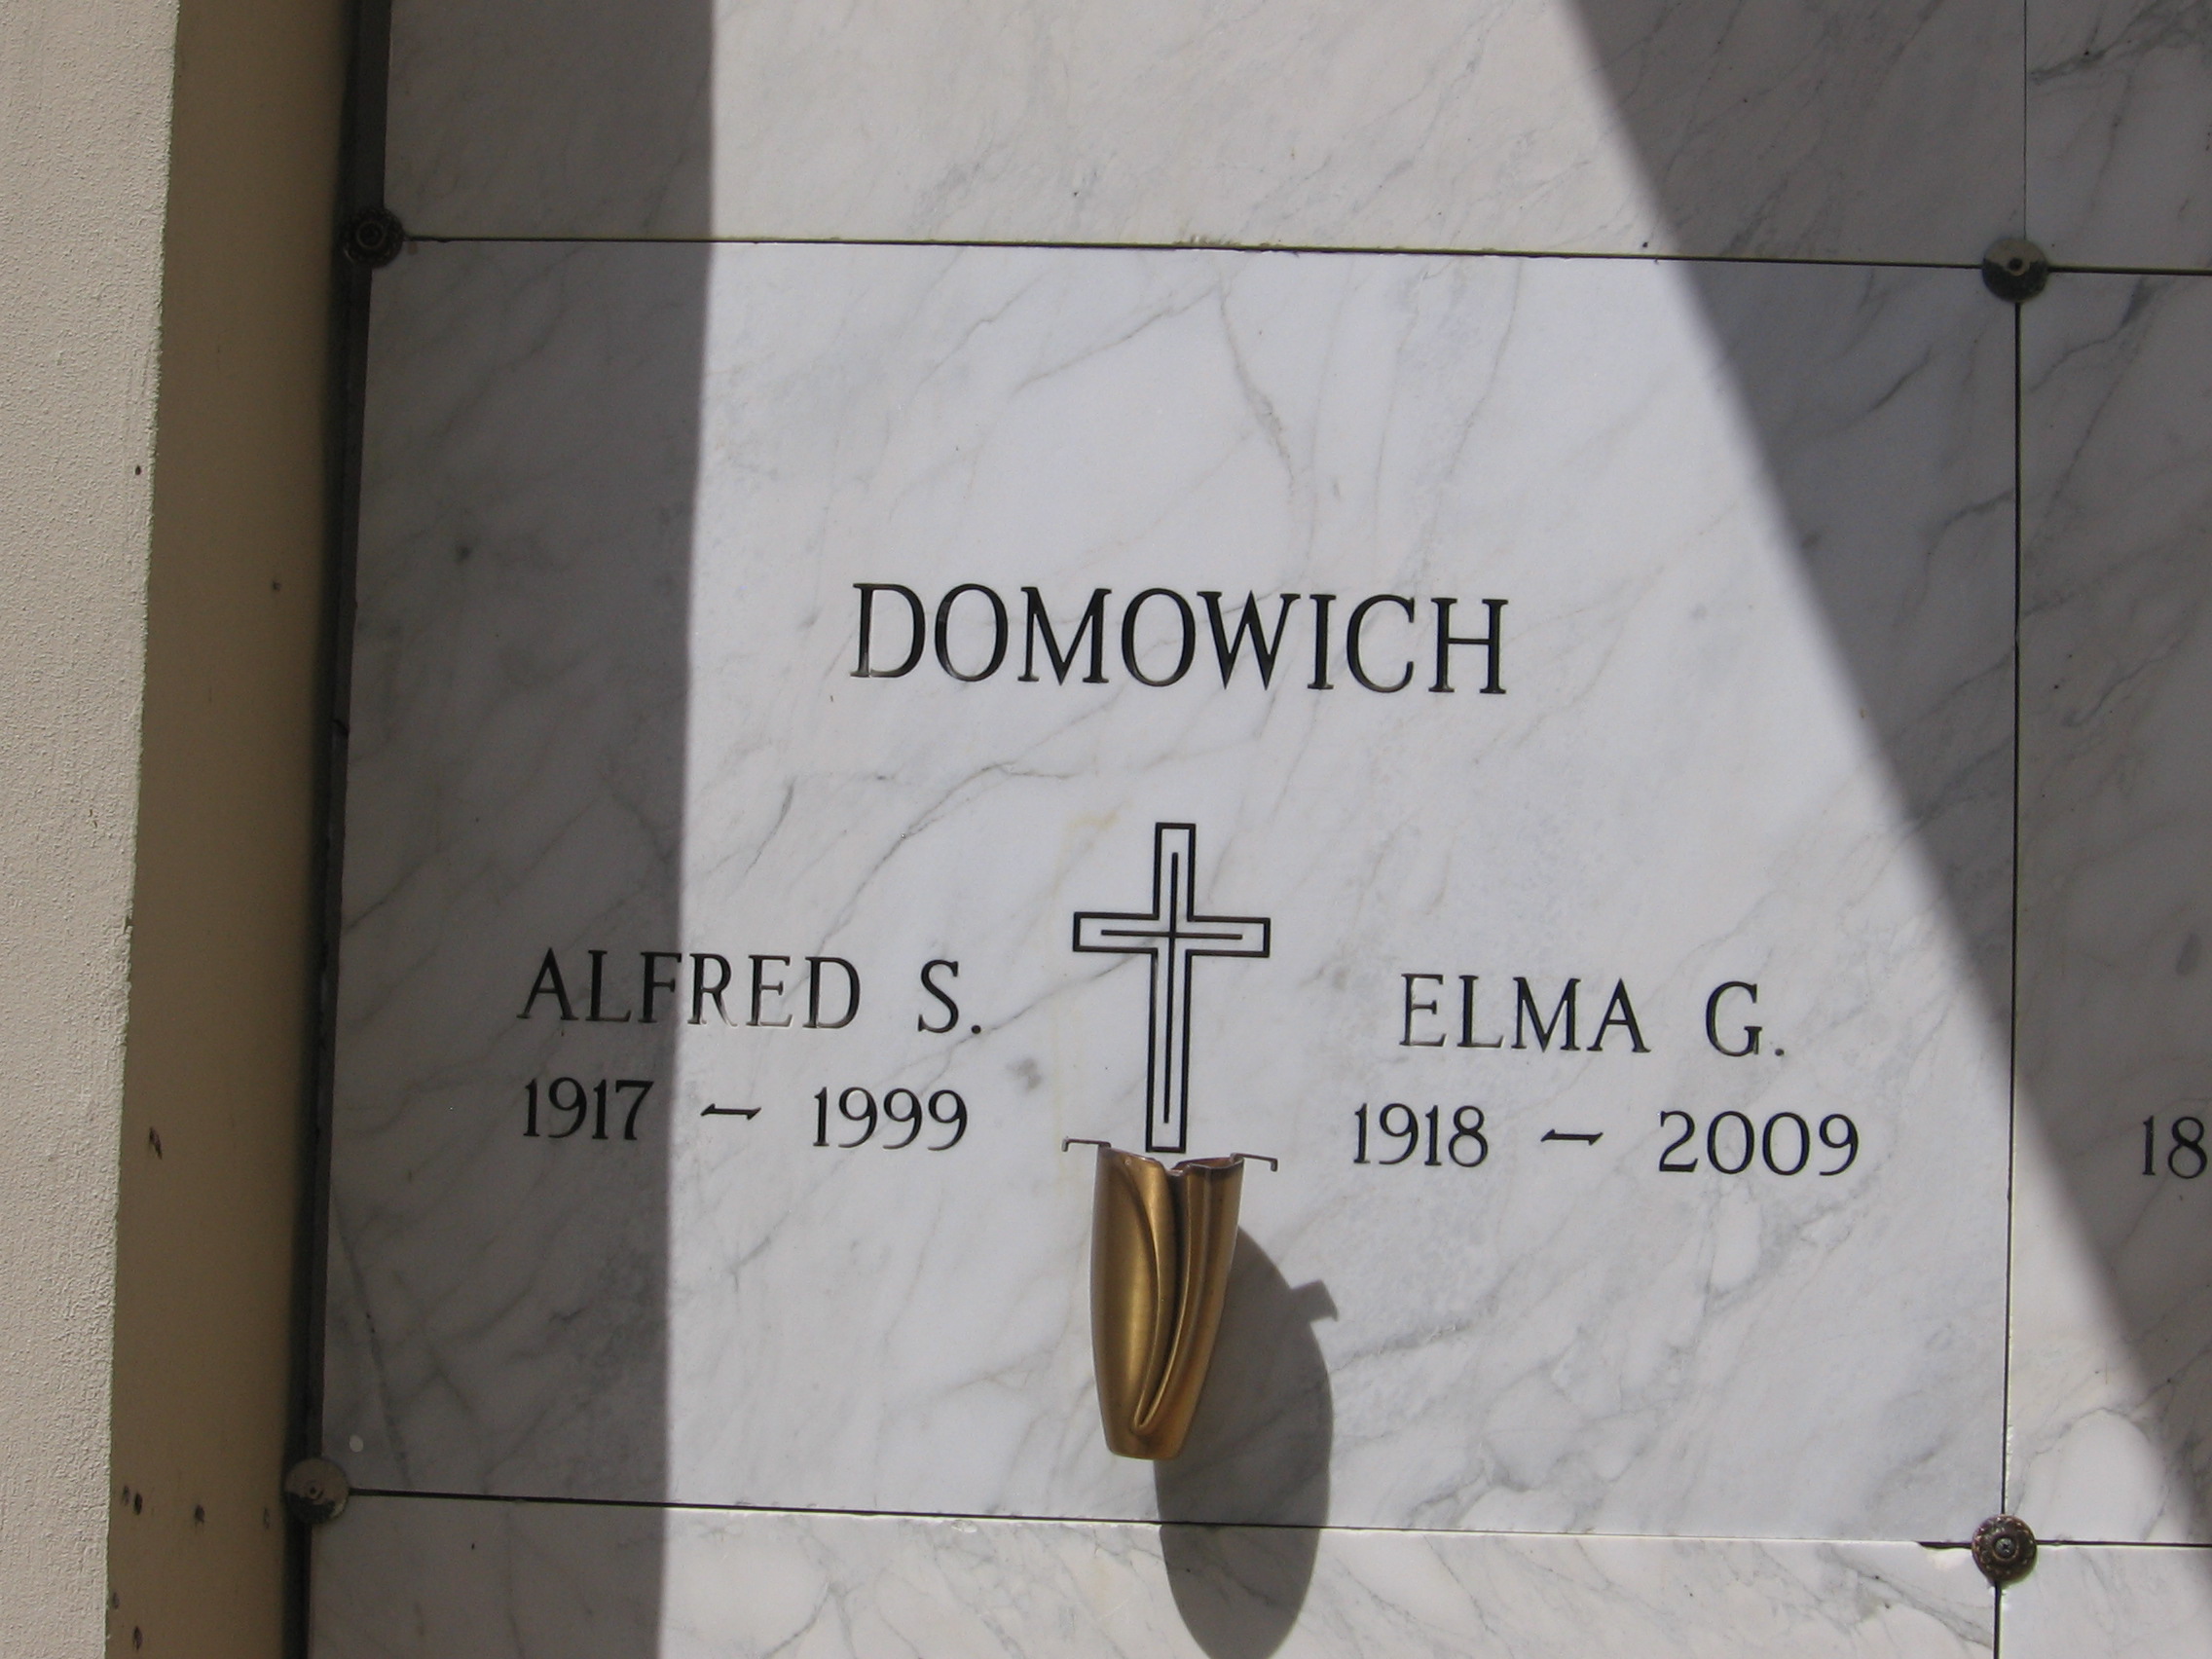 Alfred S Domowich